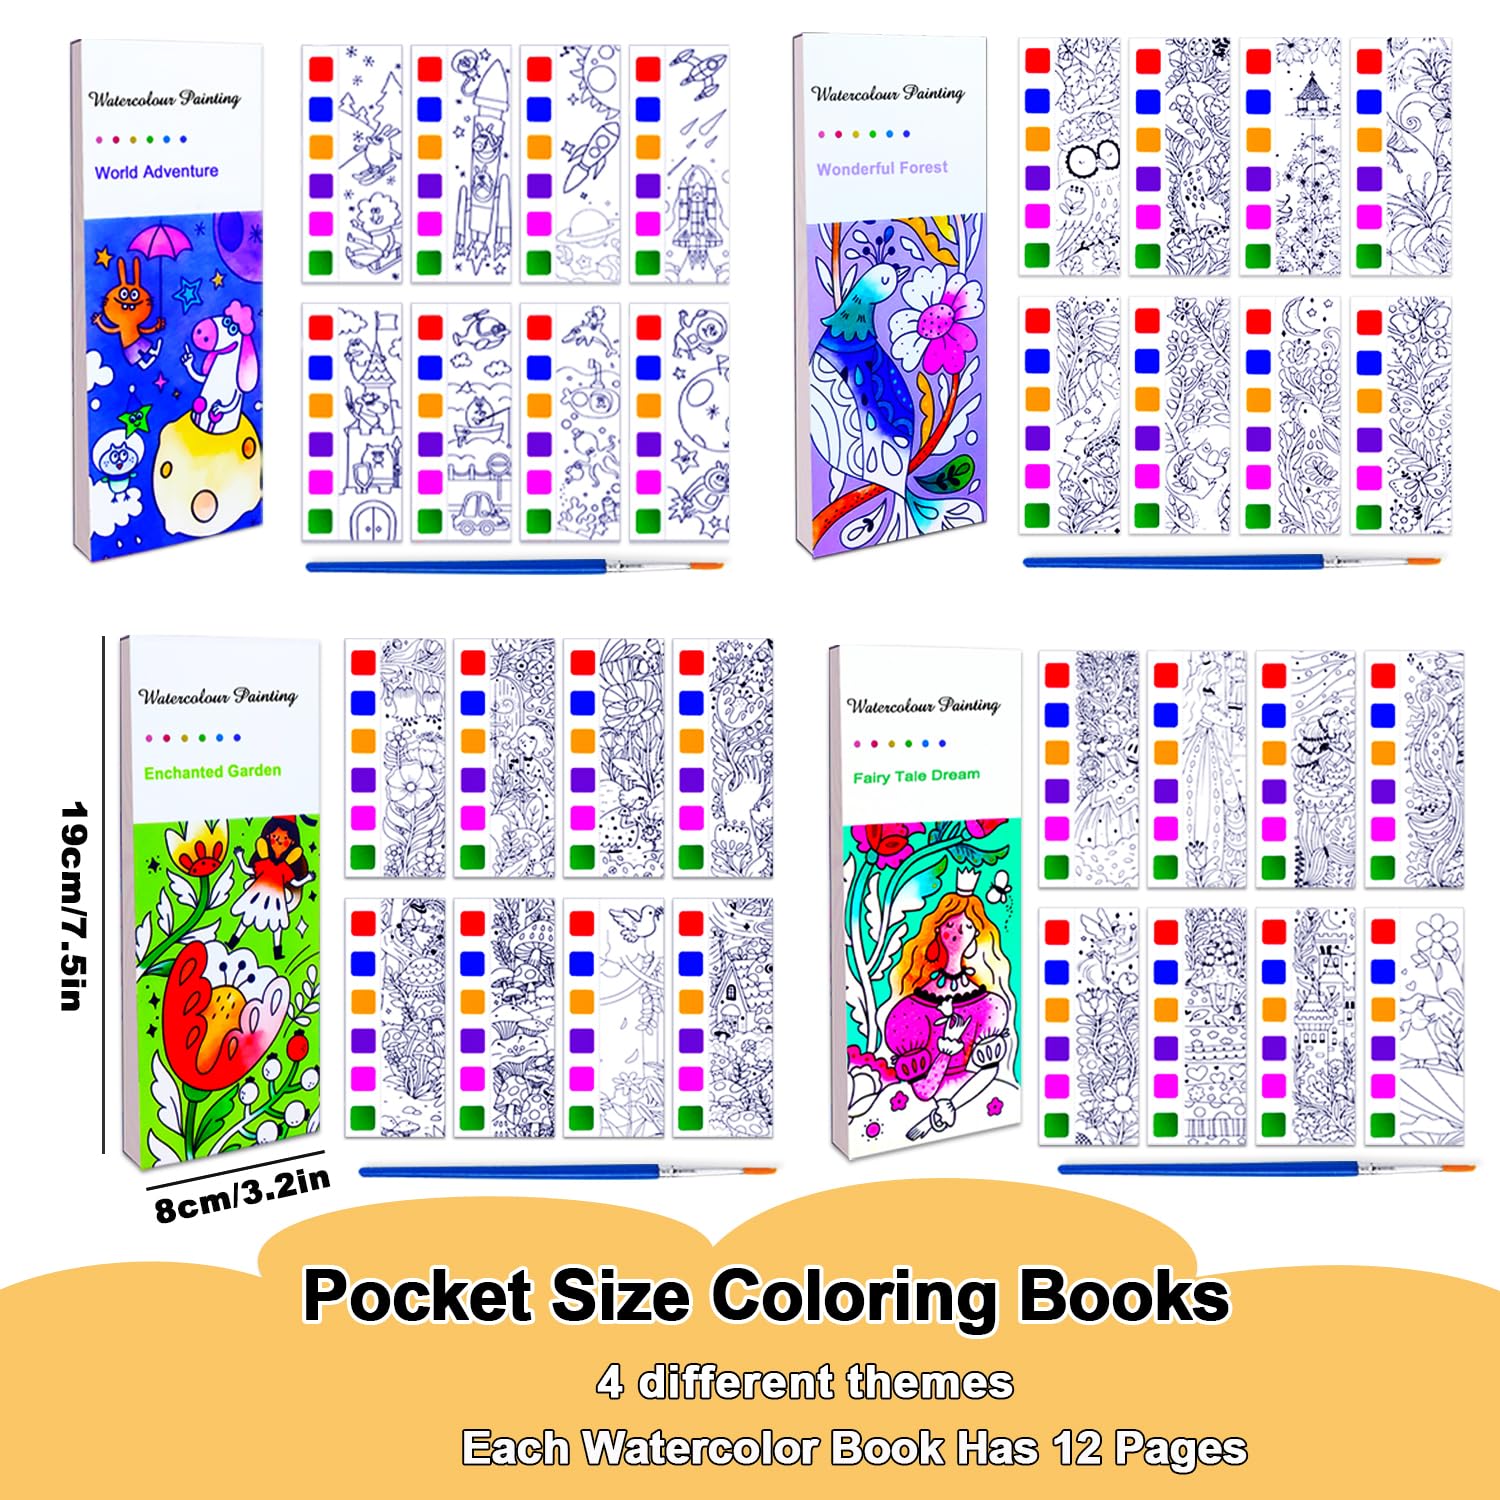  BAOXUE Water Coloring Books for Kids Ages 3 4 5 6 7 8,Pocket  Watercolor Painting Book for Toddlers,Arts and Crafts for Boys Girls,Paint  with Water Colors Book Kit,Kids Travel Art Set